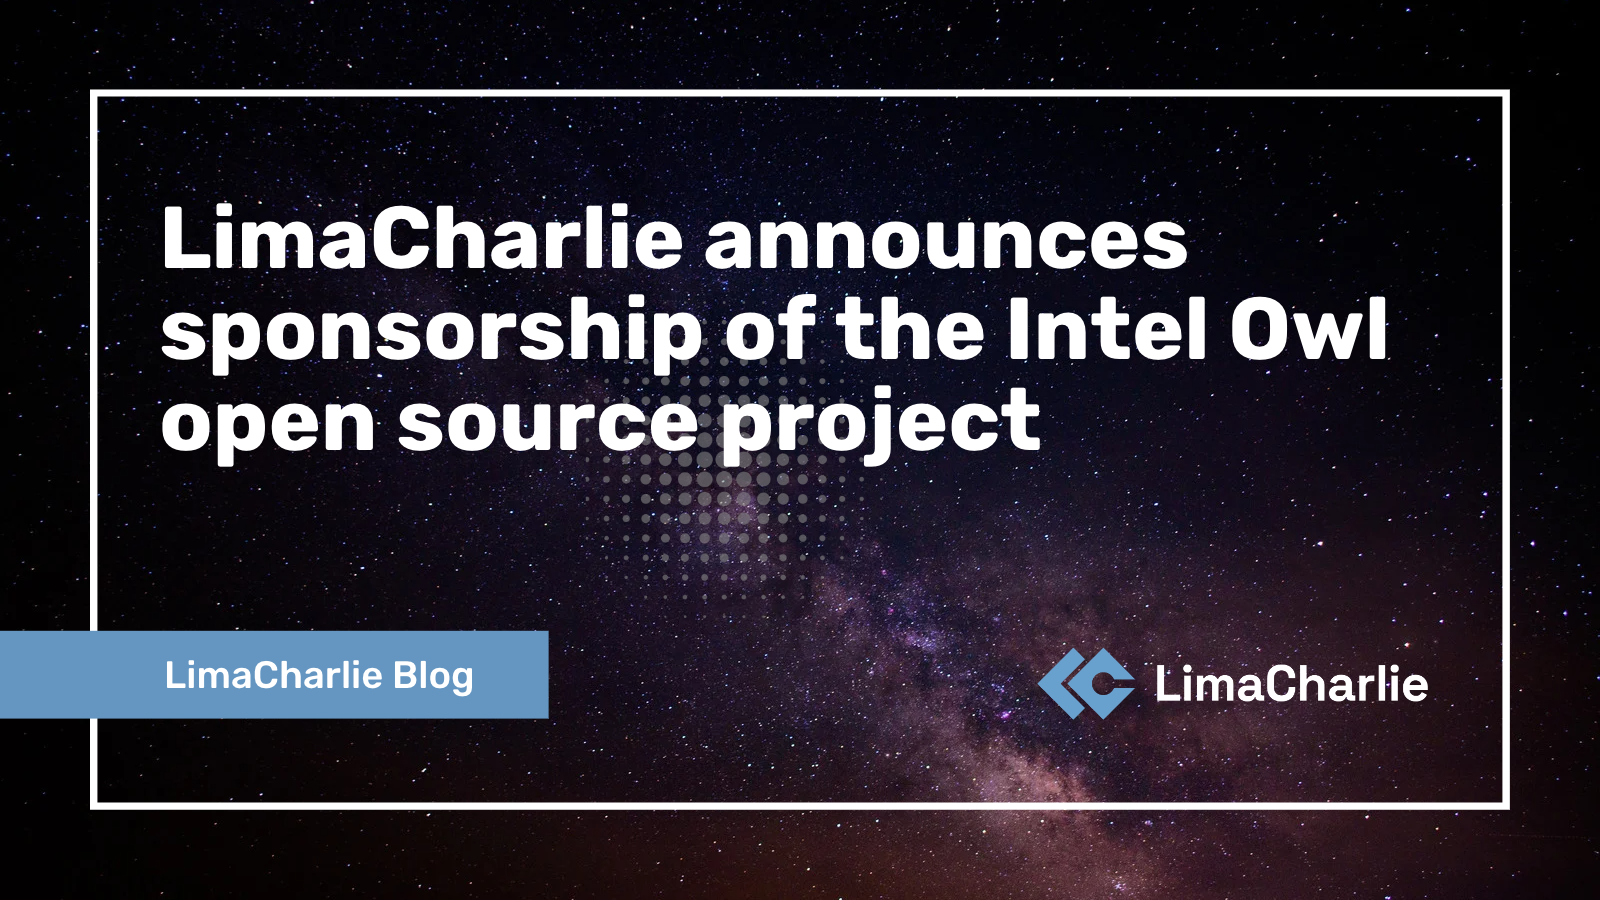 LimaCharlie announces sponsorship of the Intel Owl open source project